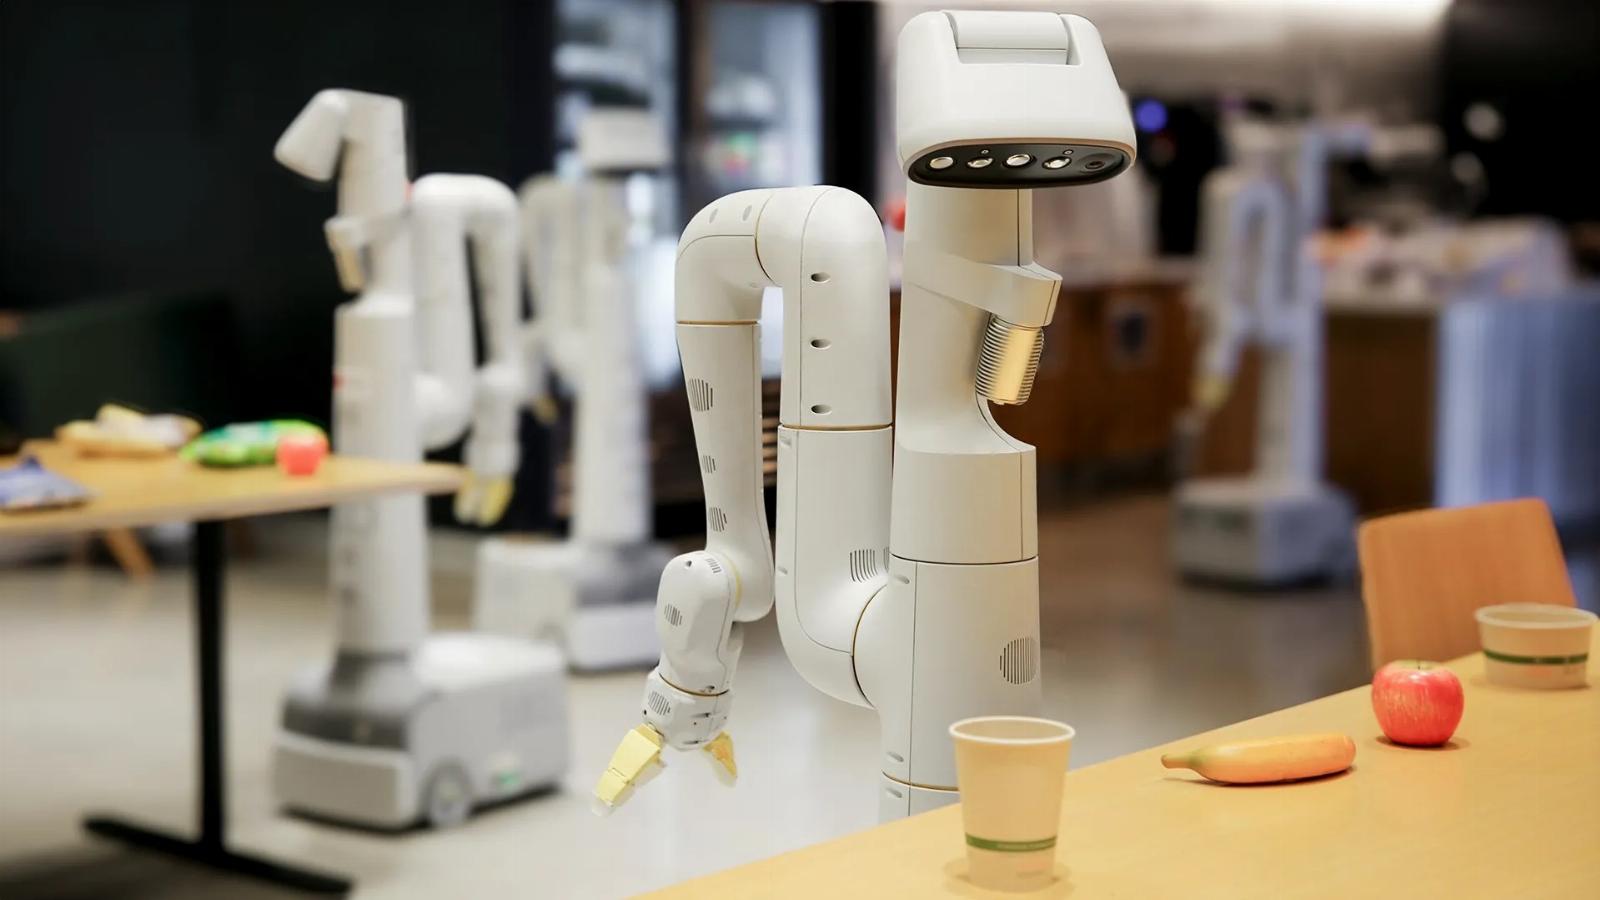 Google outlines new methods for training robots with video and large language models